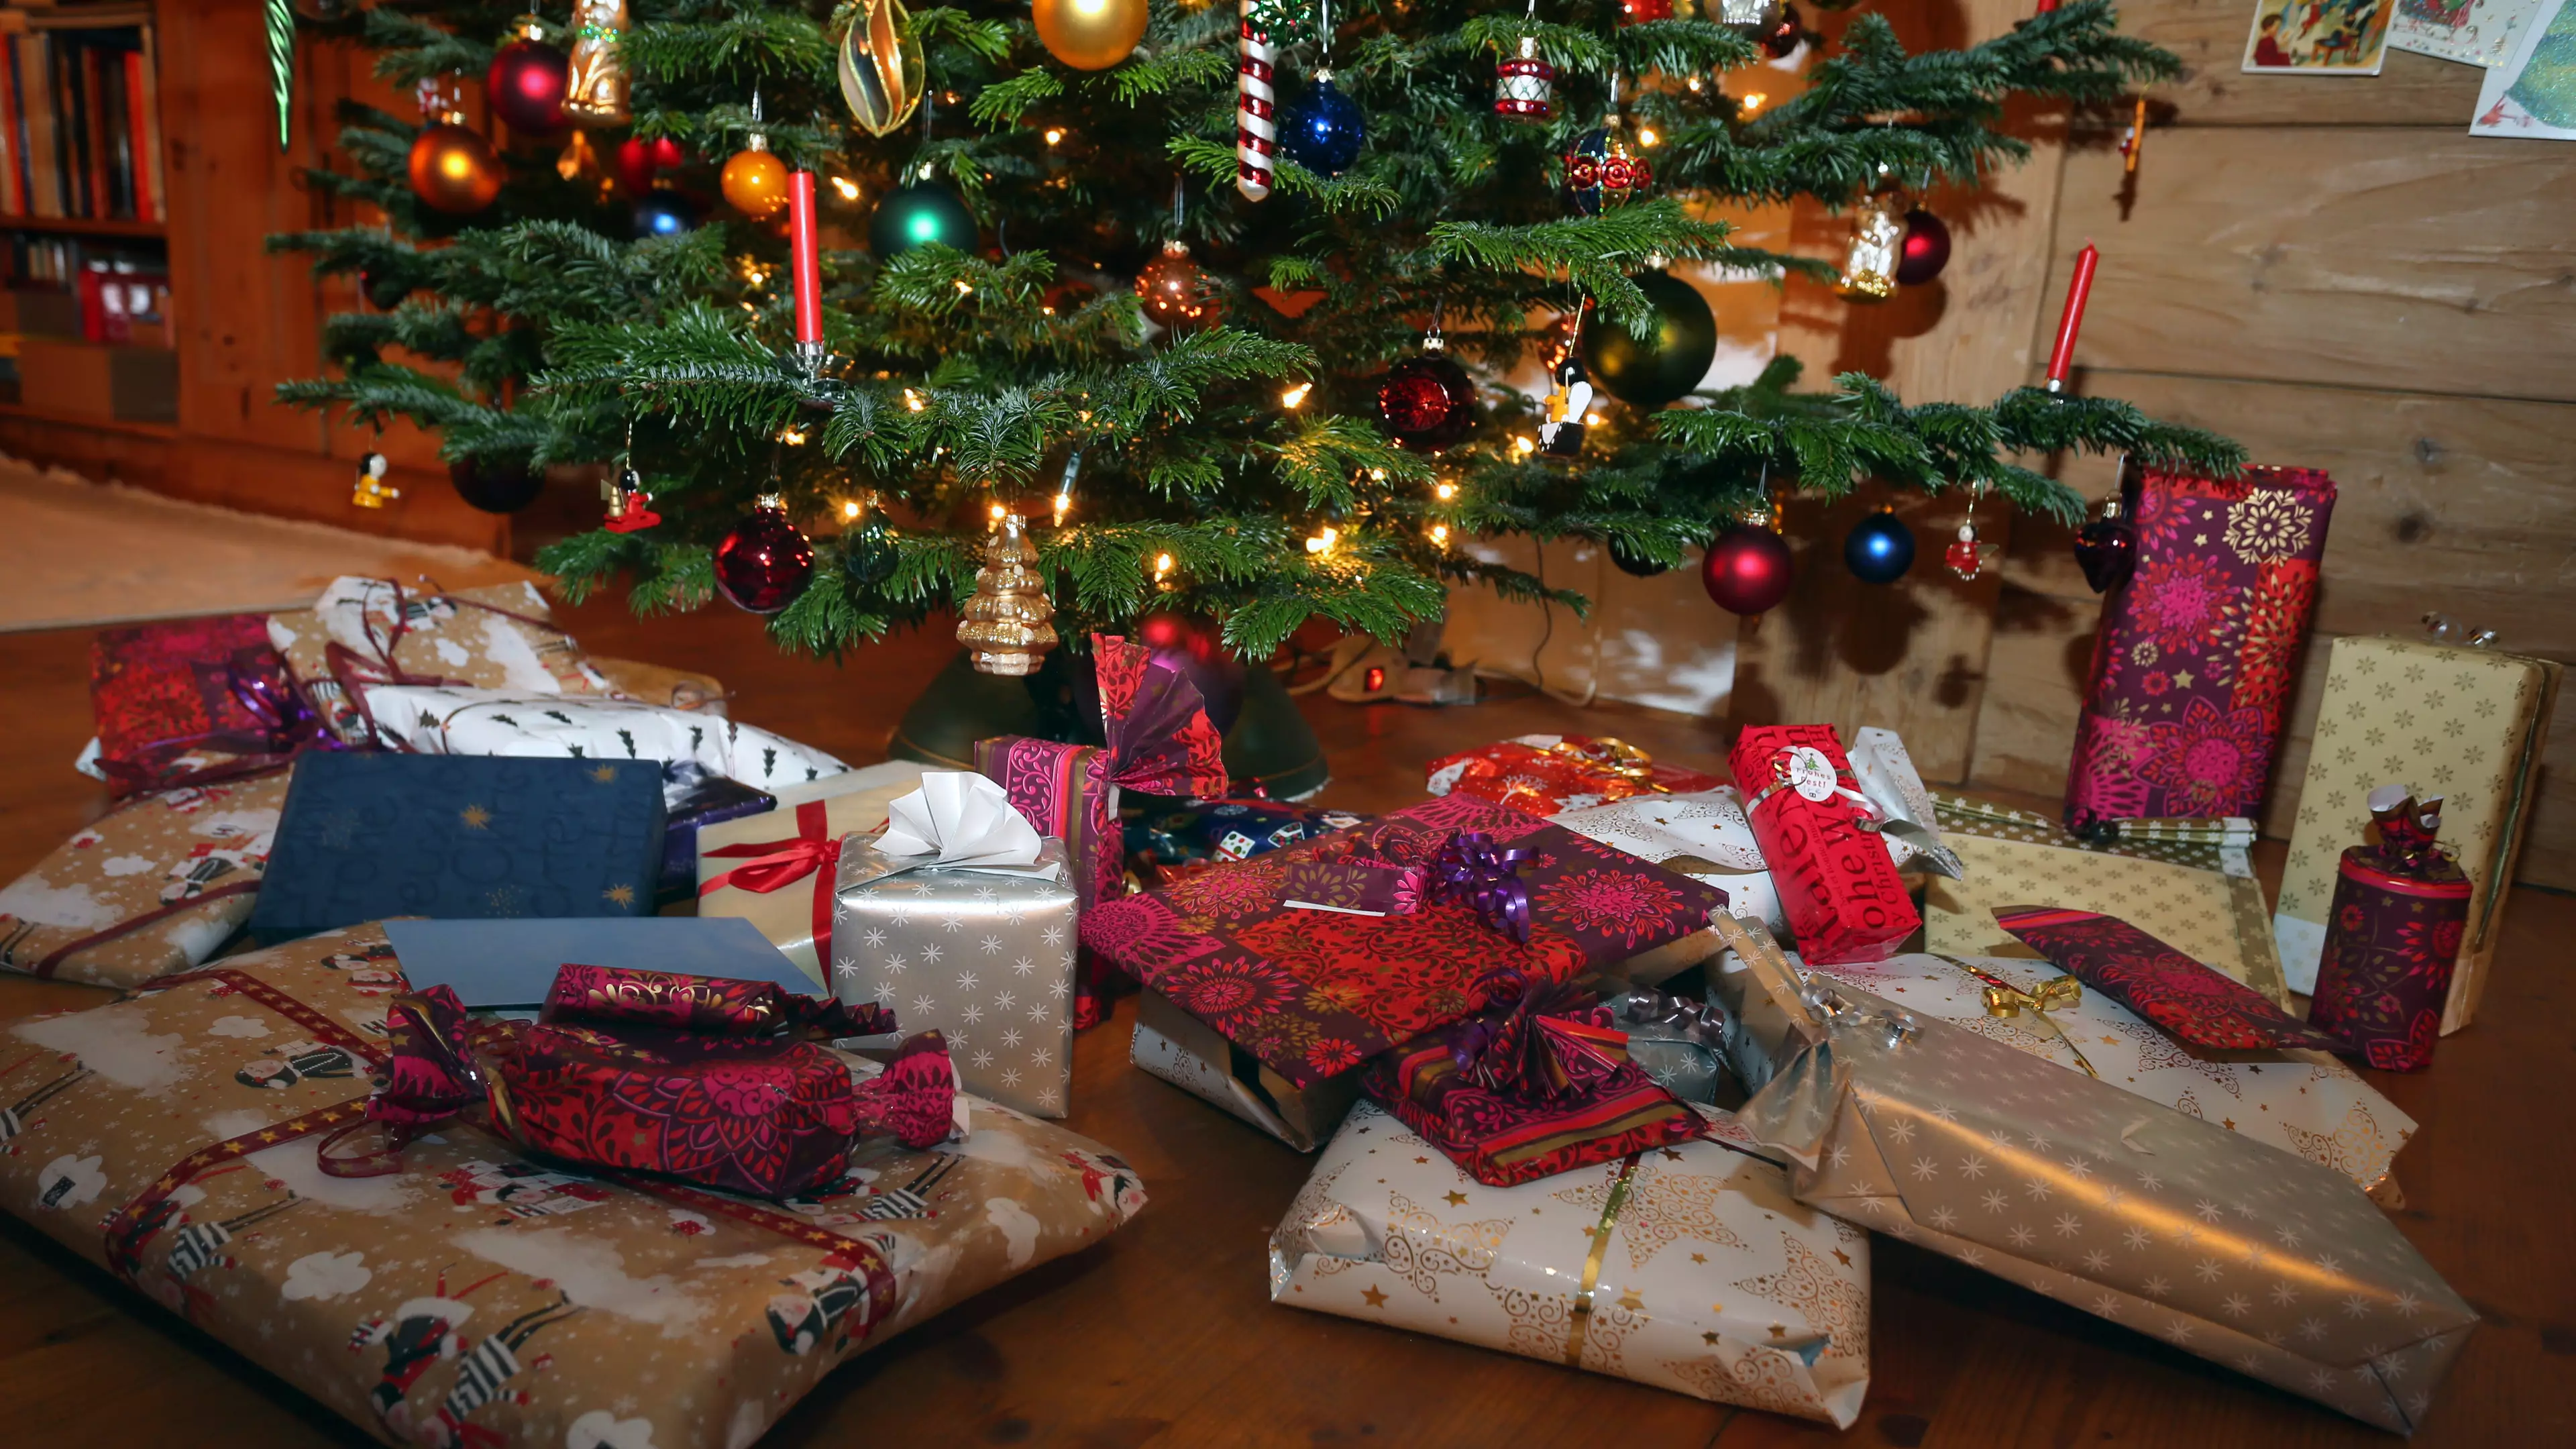 People Who Can't Wrap Christmas Presents Bring More Joy, Study Says